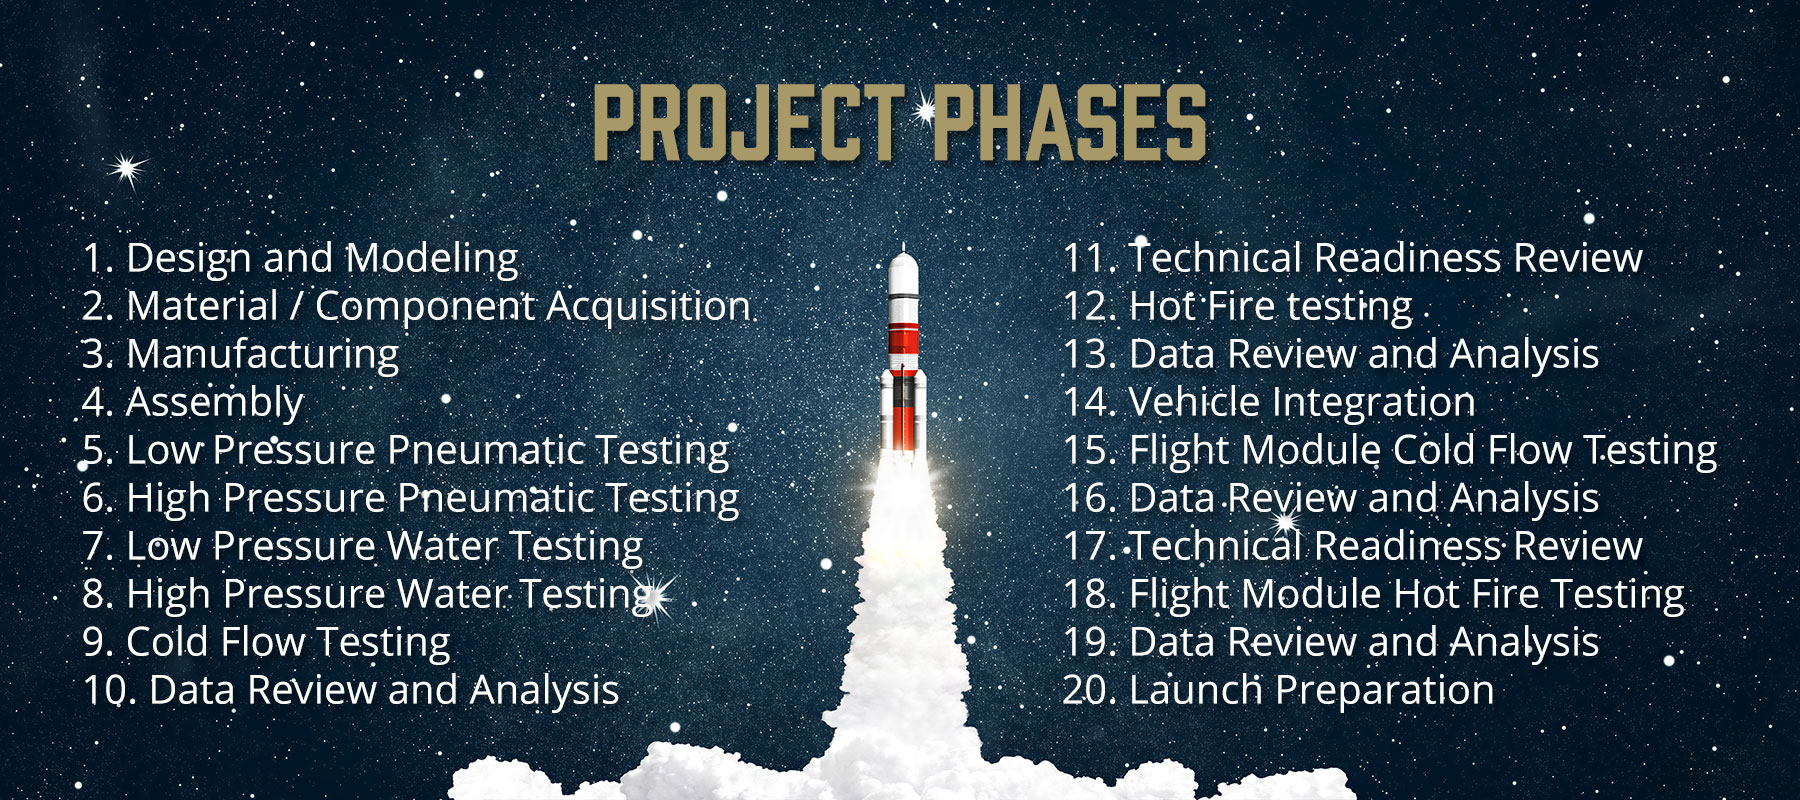 Project Phases